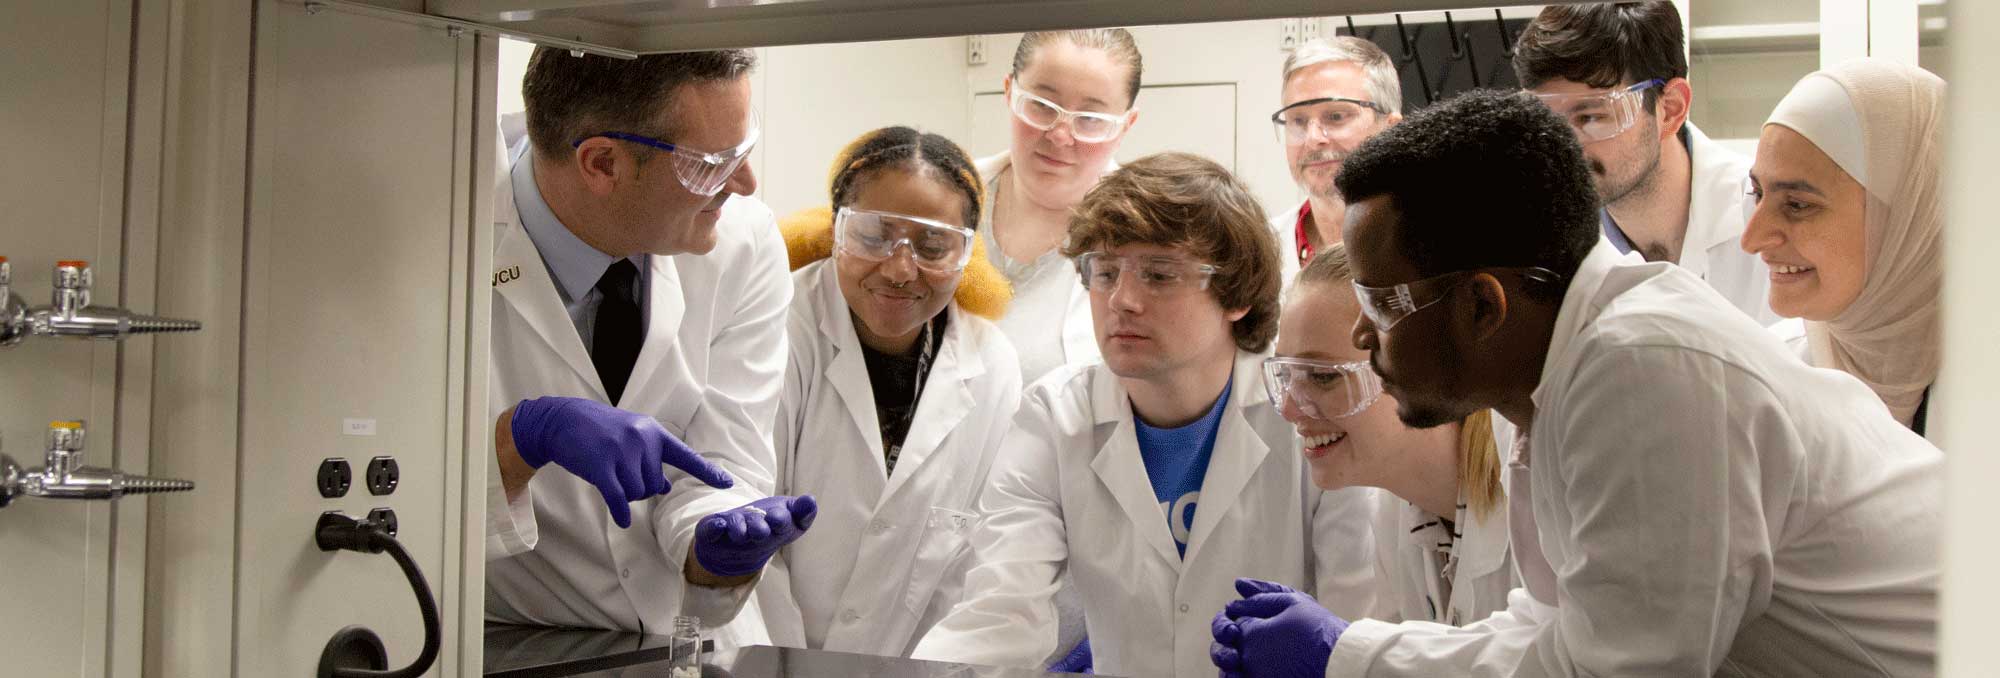 A professor and students in lab coats, gloves and protective gear gather in a lab to look at a sample of a medication.